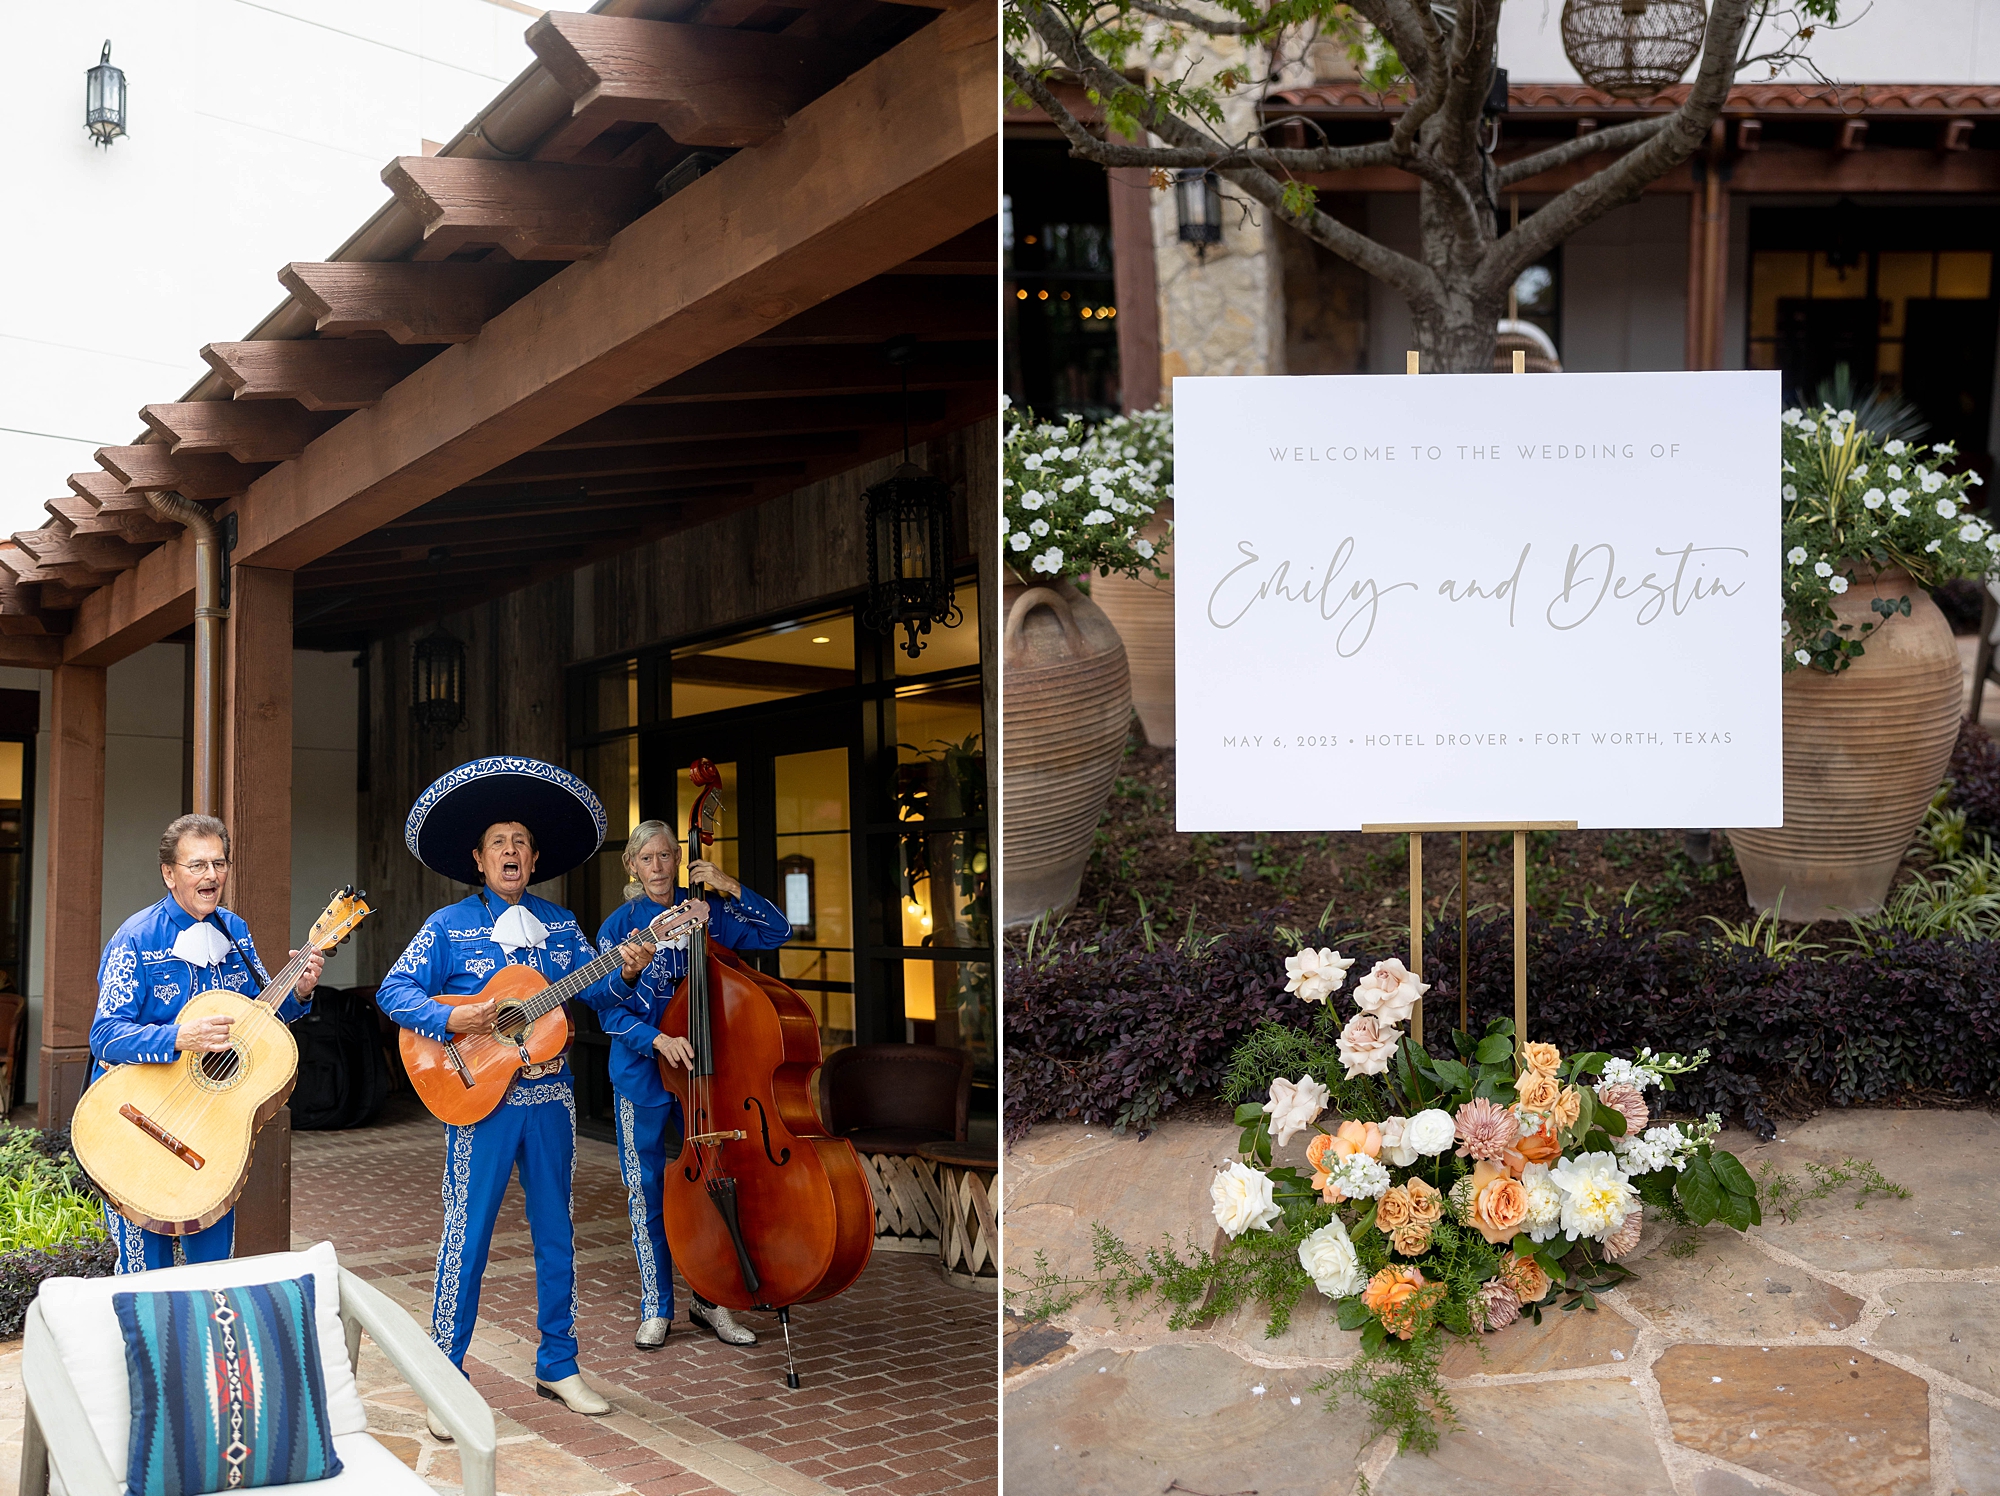 mariachi band plays on patio at The Hotel Drover